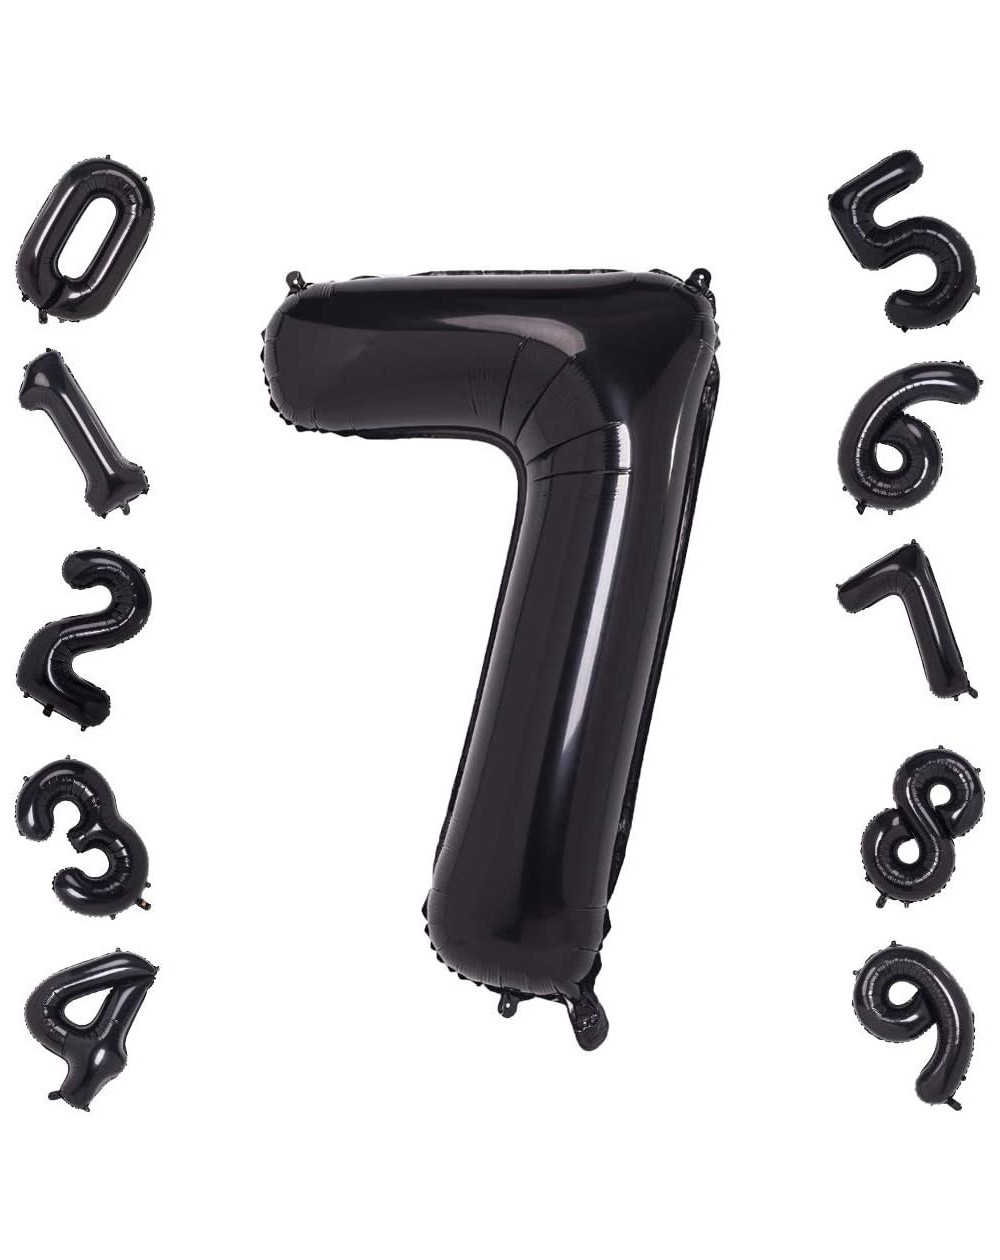 Balloons Black Number 7 Balloons-40 Inch Birthday Number Balloon Party Decorations Supplies Helium Foil Mylar Digital Balloon...